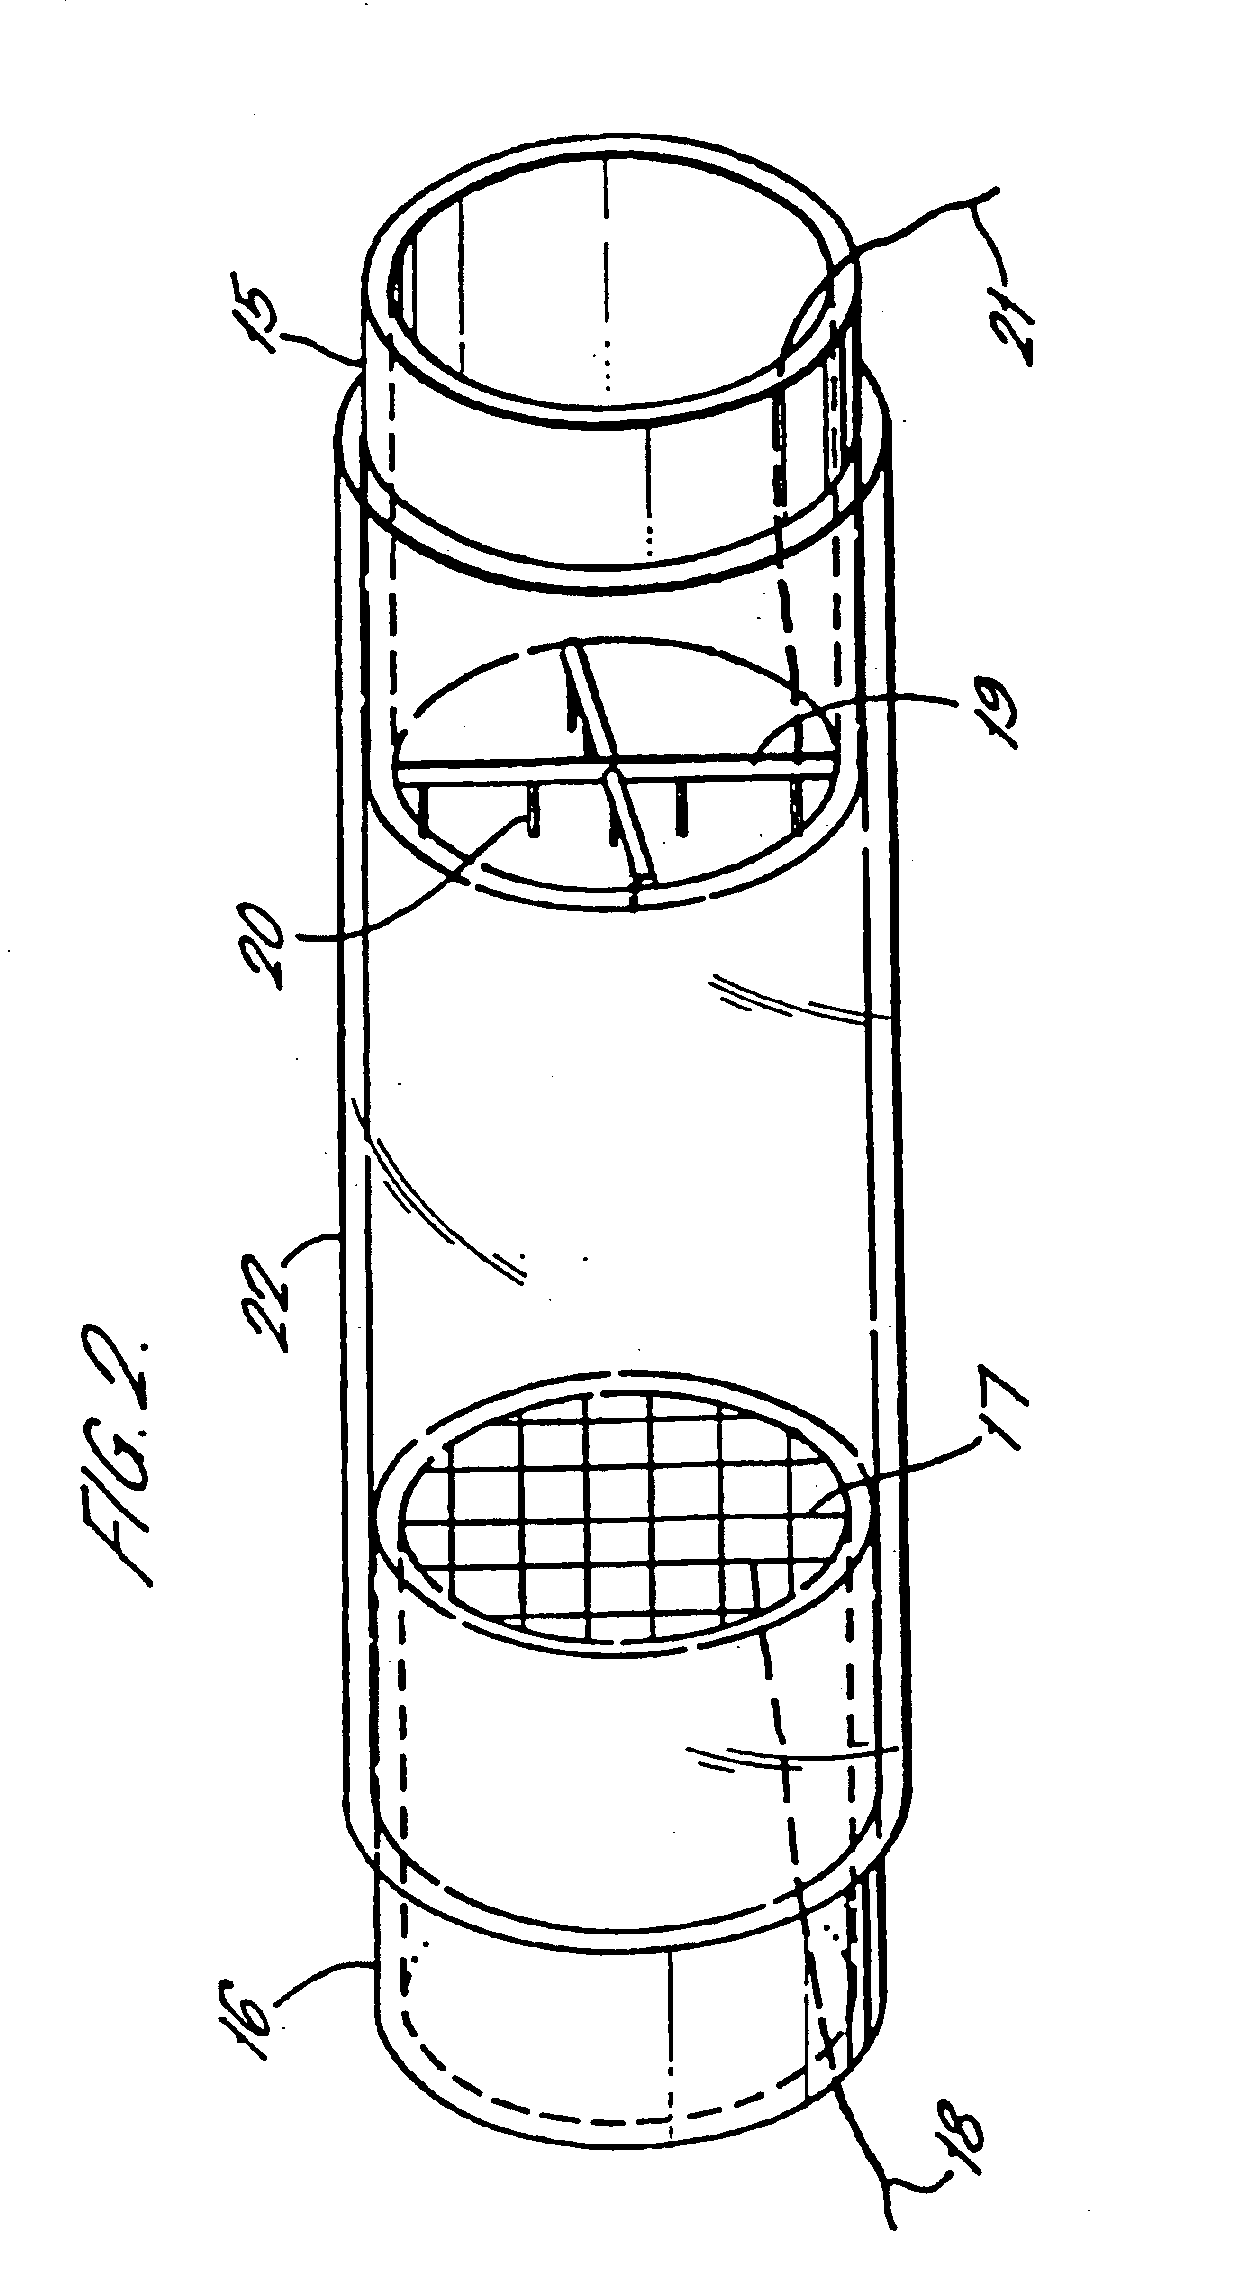 Method and apparatus for dispersing a volatile composition